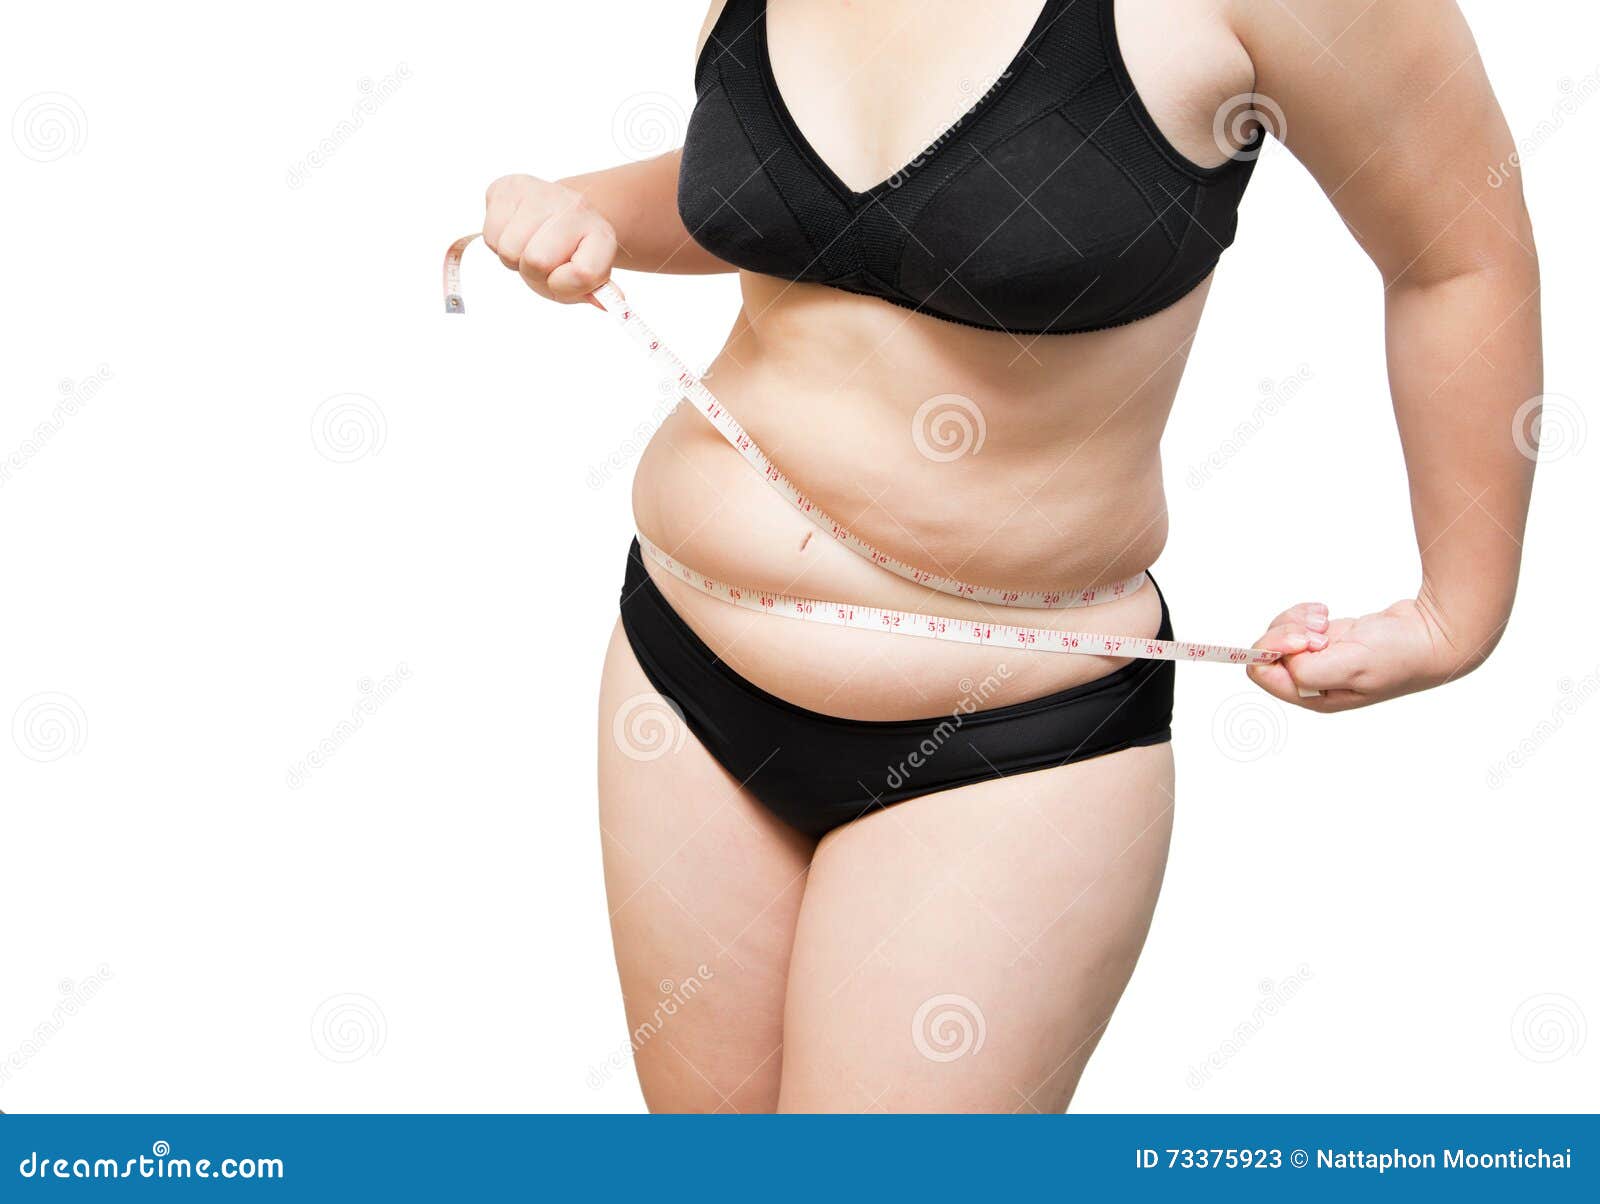 Fat Woman Show Squeeze Tighten Body Fat by Measure Tape Overweight